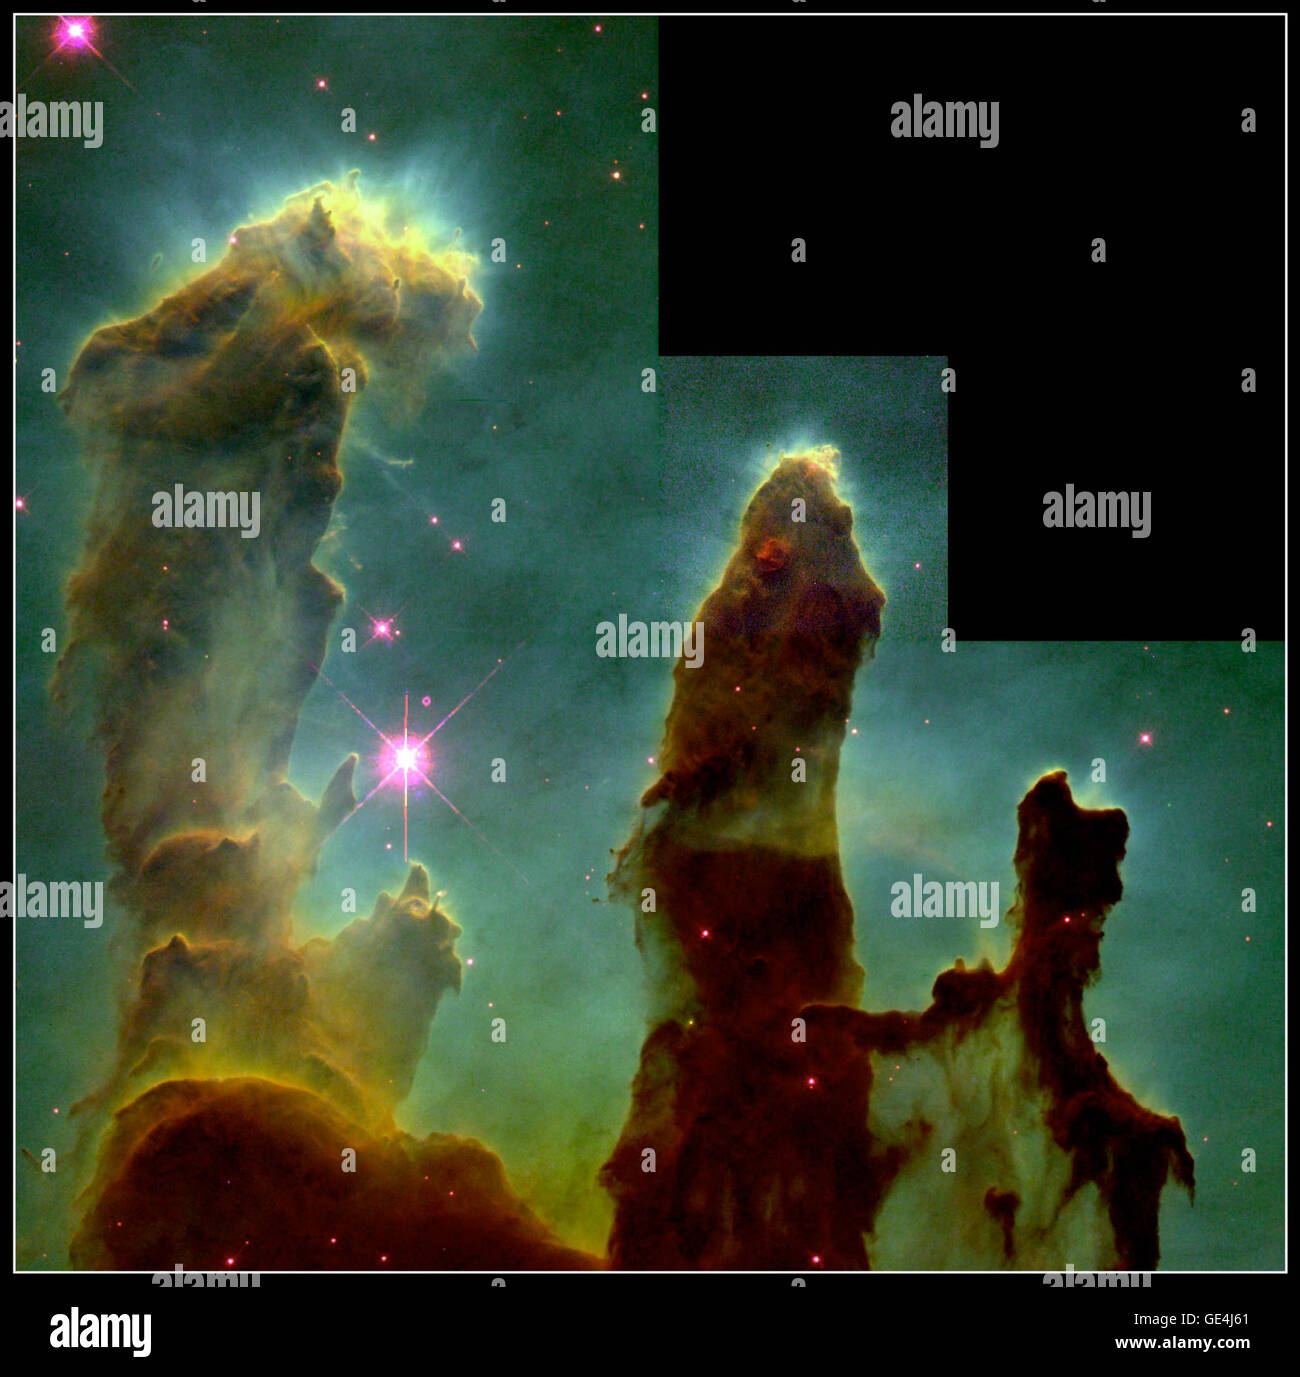 These eerie, dark pillar-like structures are columns of cool interstellar hydrogen gas and dust that are also incubators for new stars. The pillars protrude from the interior wall of a dark molecular cloud like stalagmites from the floor of a cavern. They are part of the &quot;Eagle Nebula&quot; (also called M16 -- the 16th object in Charles Messier's 18th century catalog of &quot;fuzzy&quot; objects that aren't comets), a nearby star-forming region 7,000 light-years away in the constellation Serpens. Ultraviolet light is responsible for illuminating the convoluted surfaces of the columns and  Stock Photo